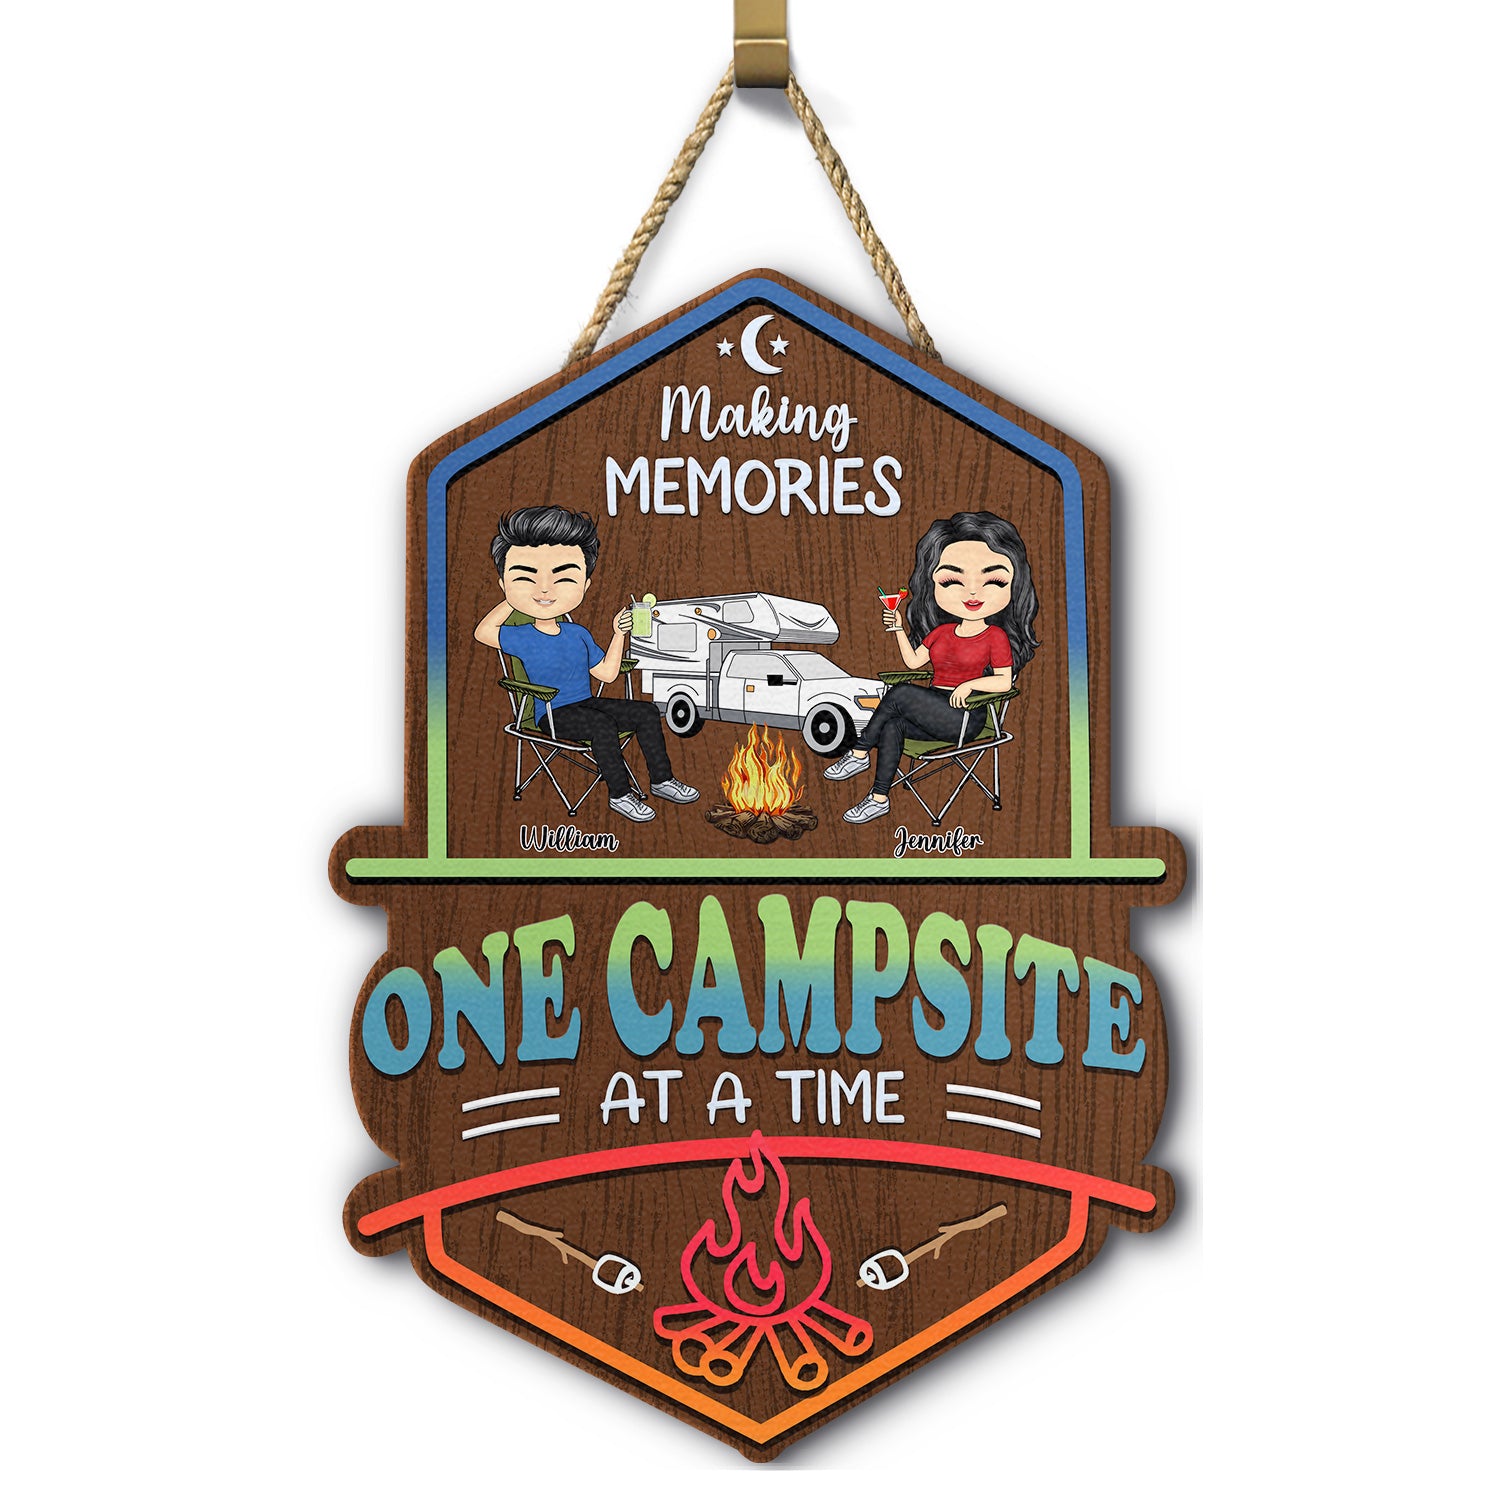 Making Memories One Campsite At A Time - Outdoor, Indoor Home Decor Gift For Campers, Husband, Wife, Couples - Personalized Custom Shaped Wood Sign